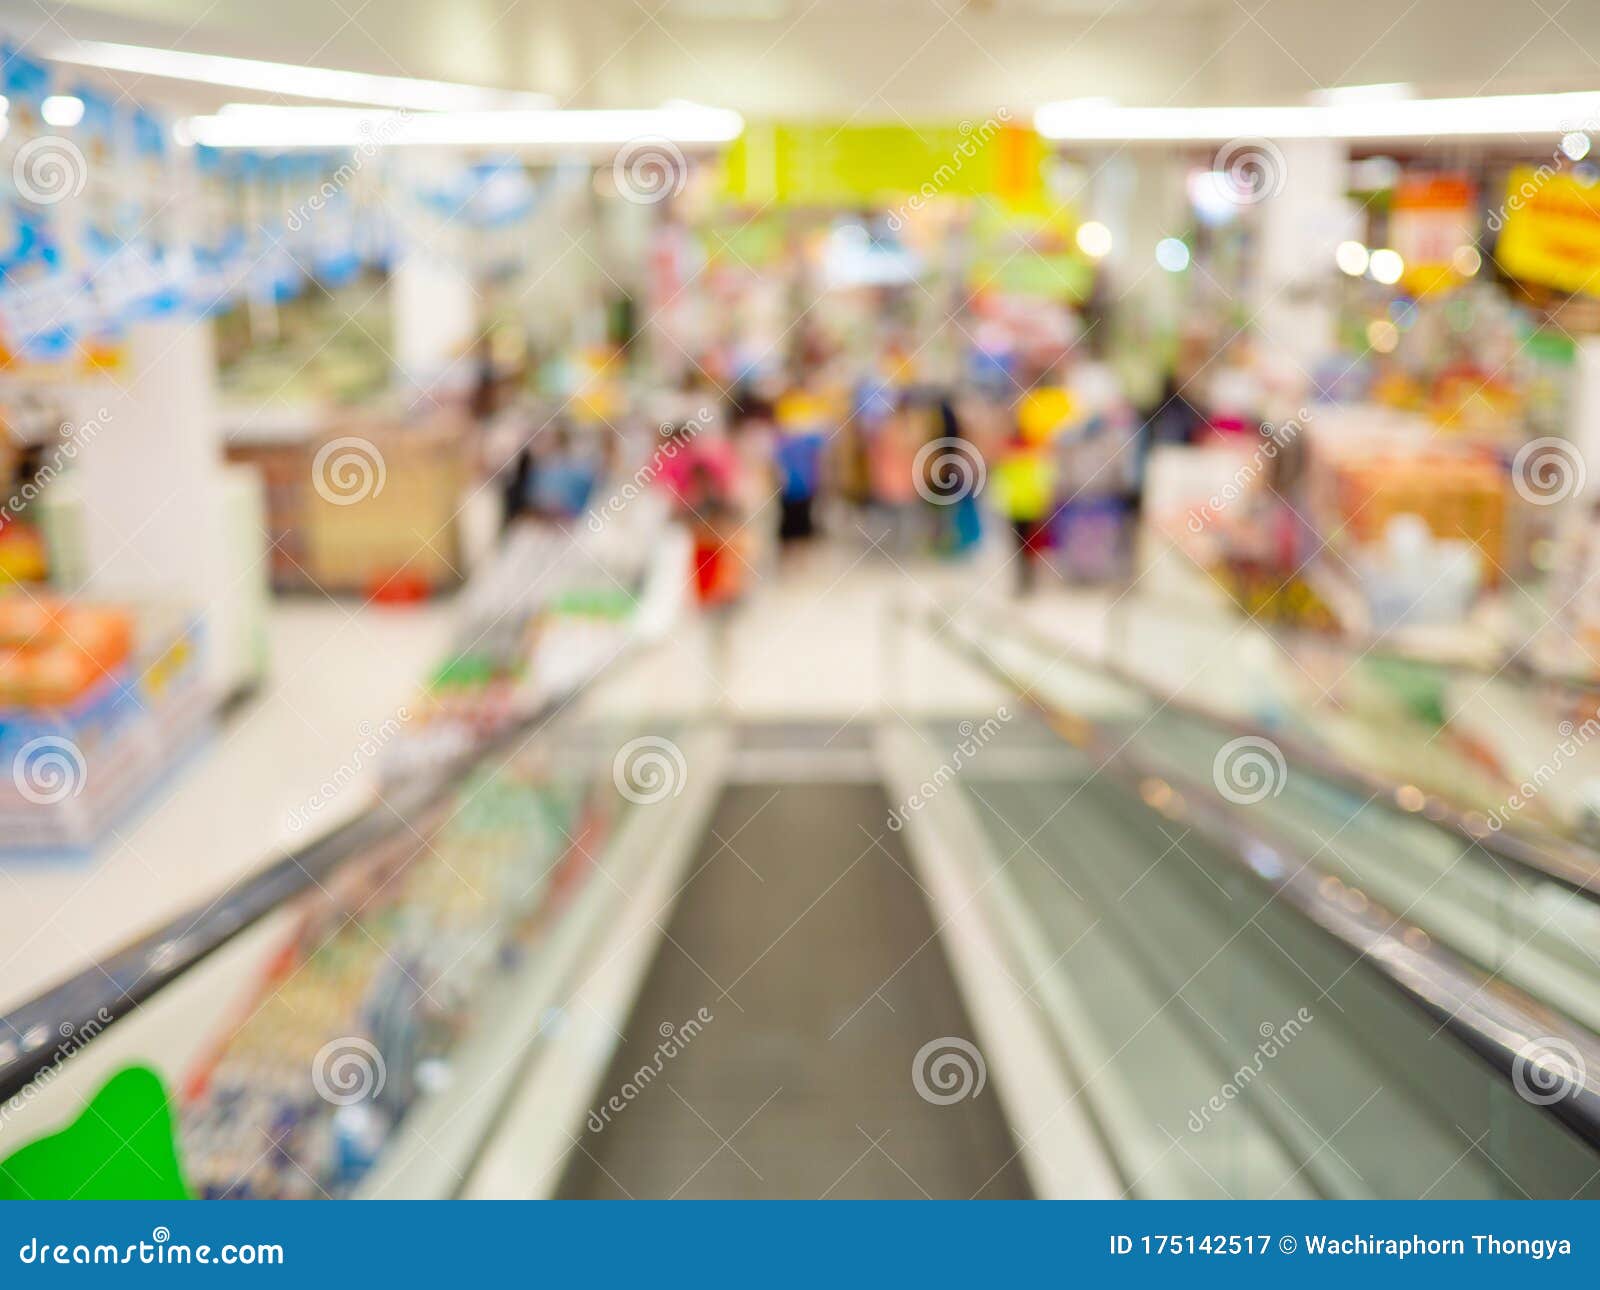 escalator inside supermarket, blurred shopping mall and retails store interior for background, shopping concept.